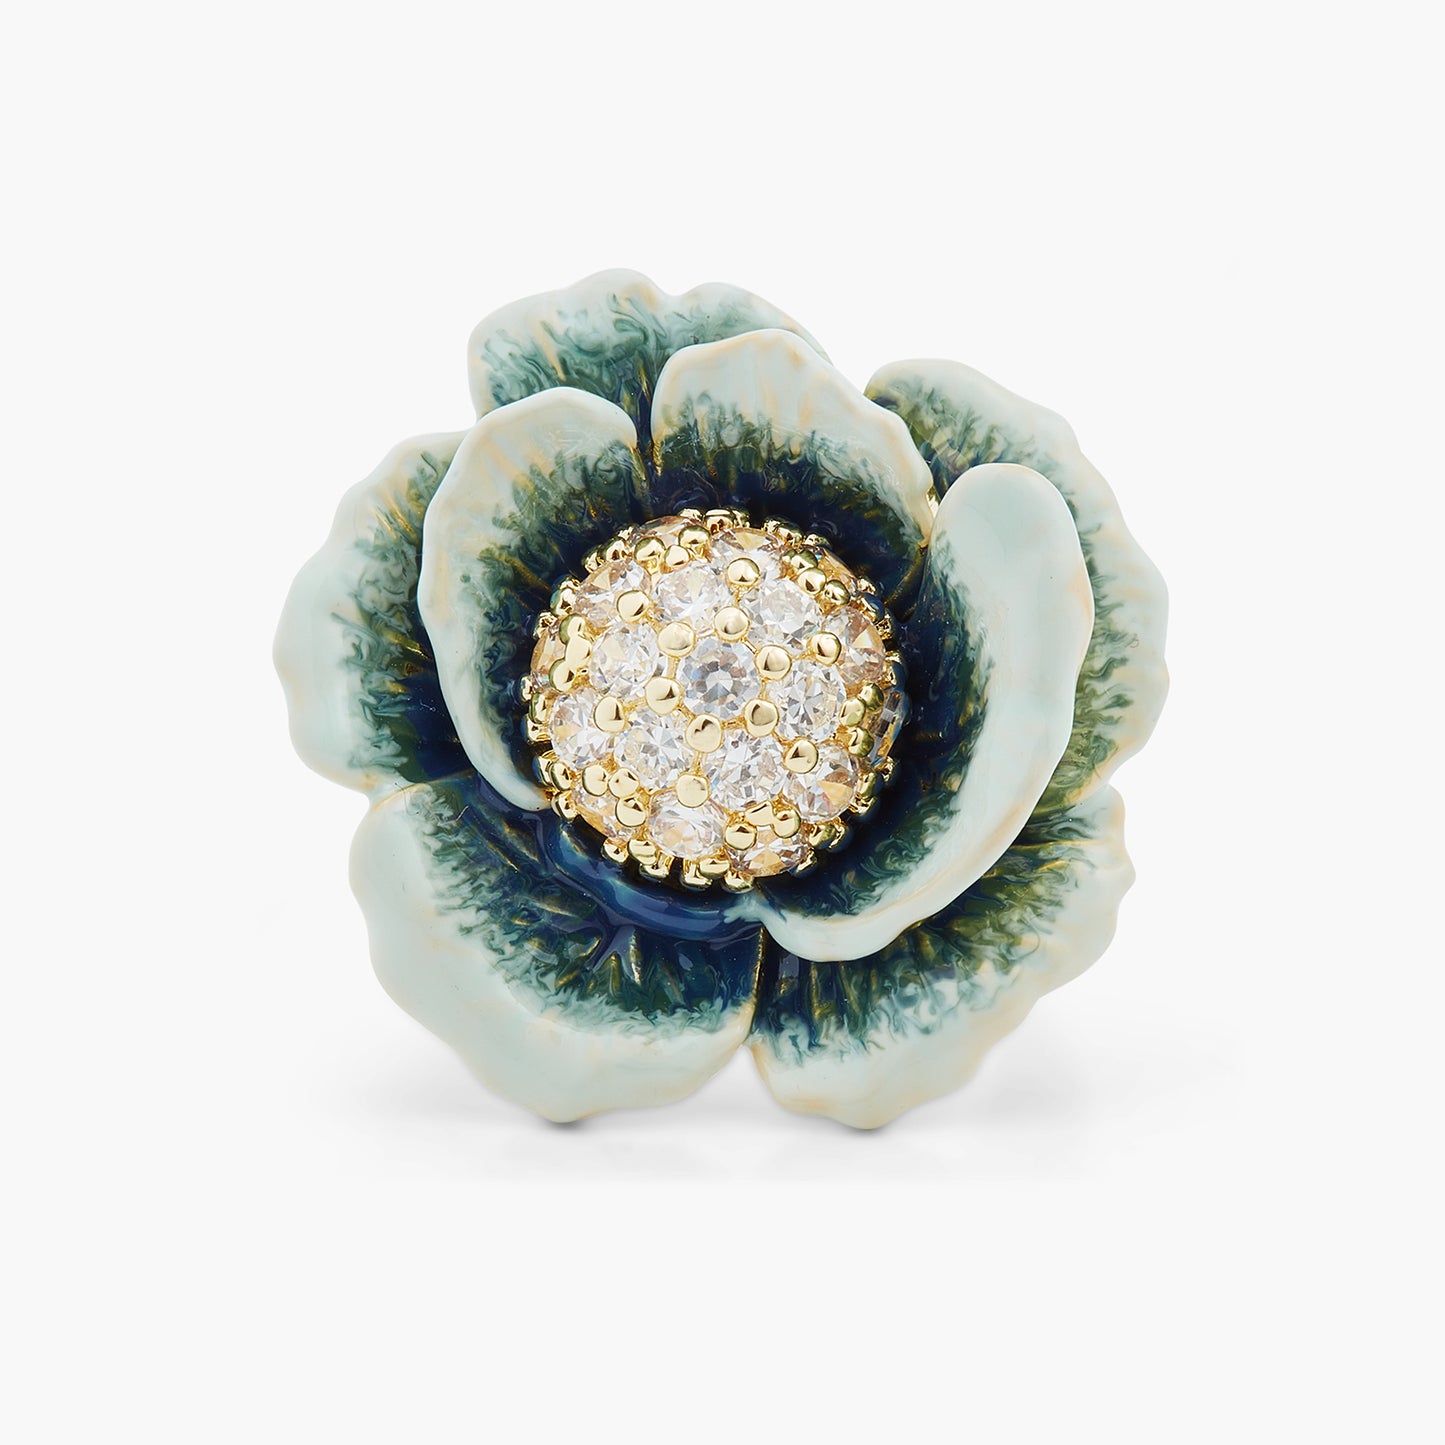 Cabbage Studded With White Crystal Cocktail Ring | ASPO6031